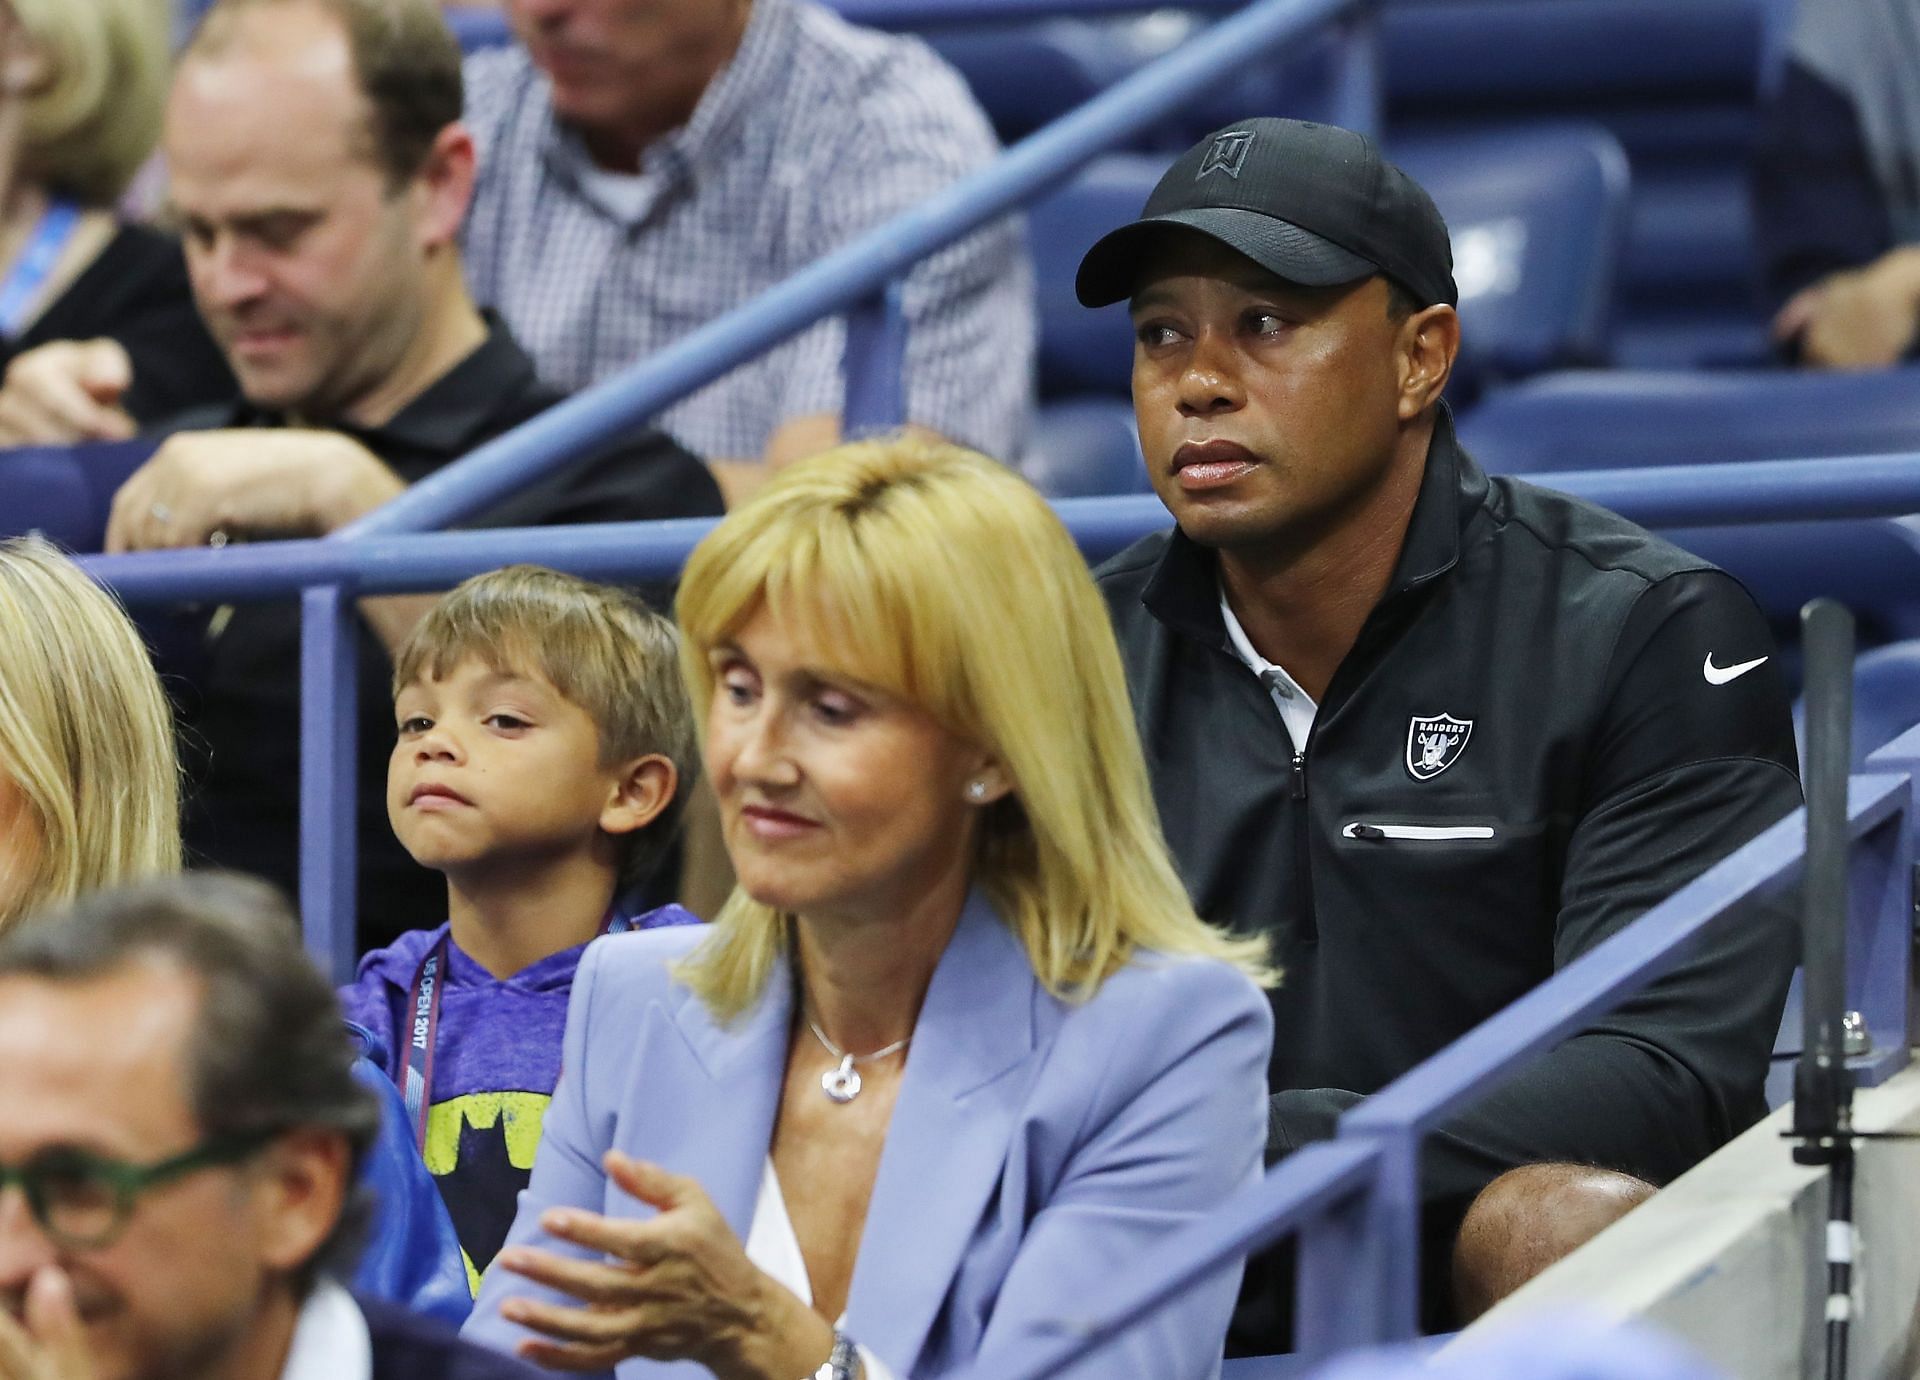 Tiger and Charlie Woods at the US Open Tennis Championship in 2017